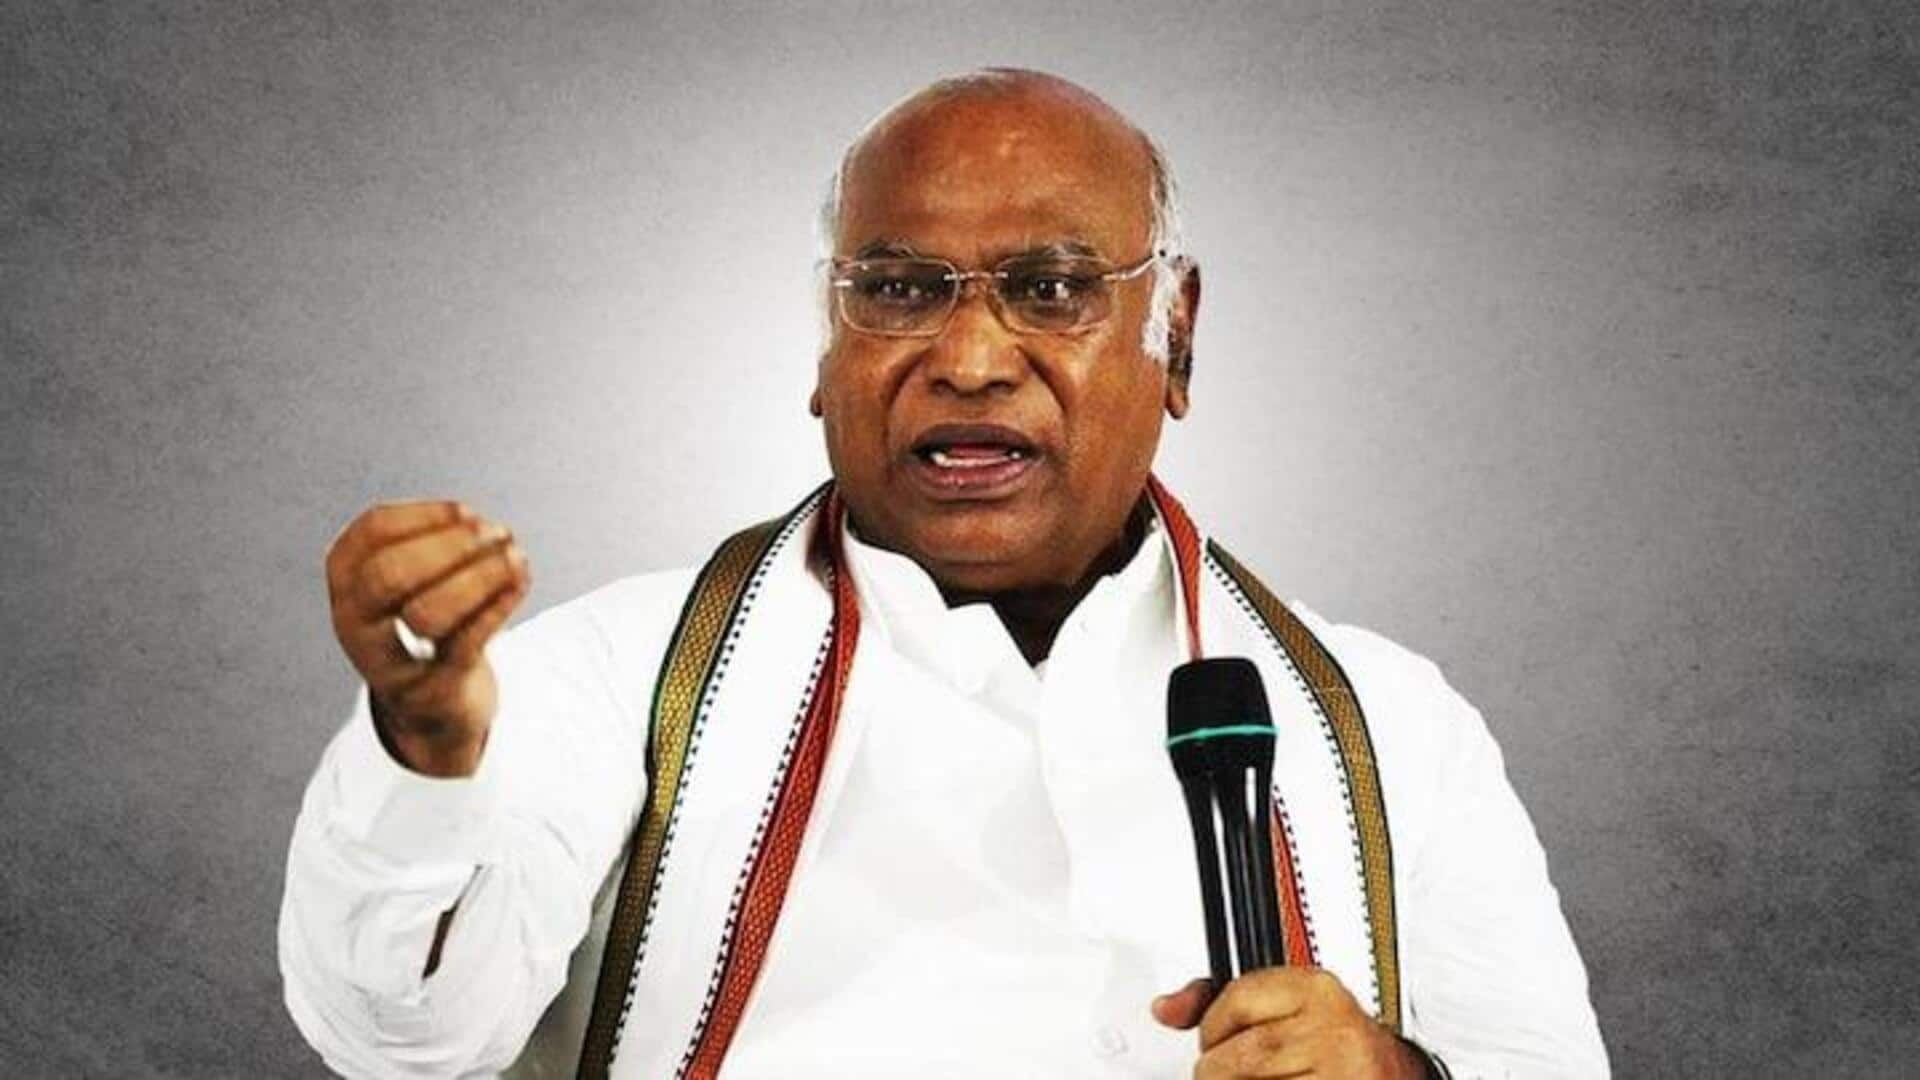 Congress President Kharge to attend Modi's swearing-in ceremony